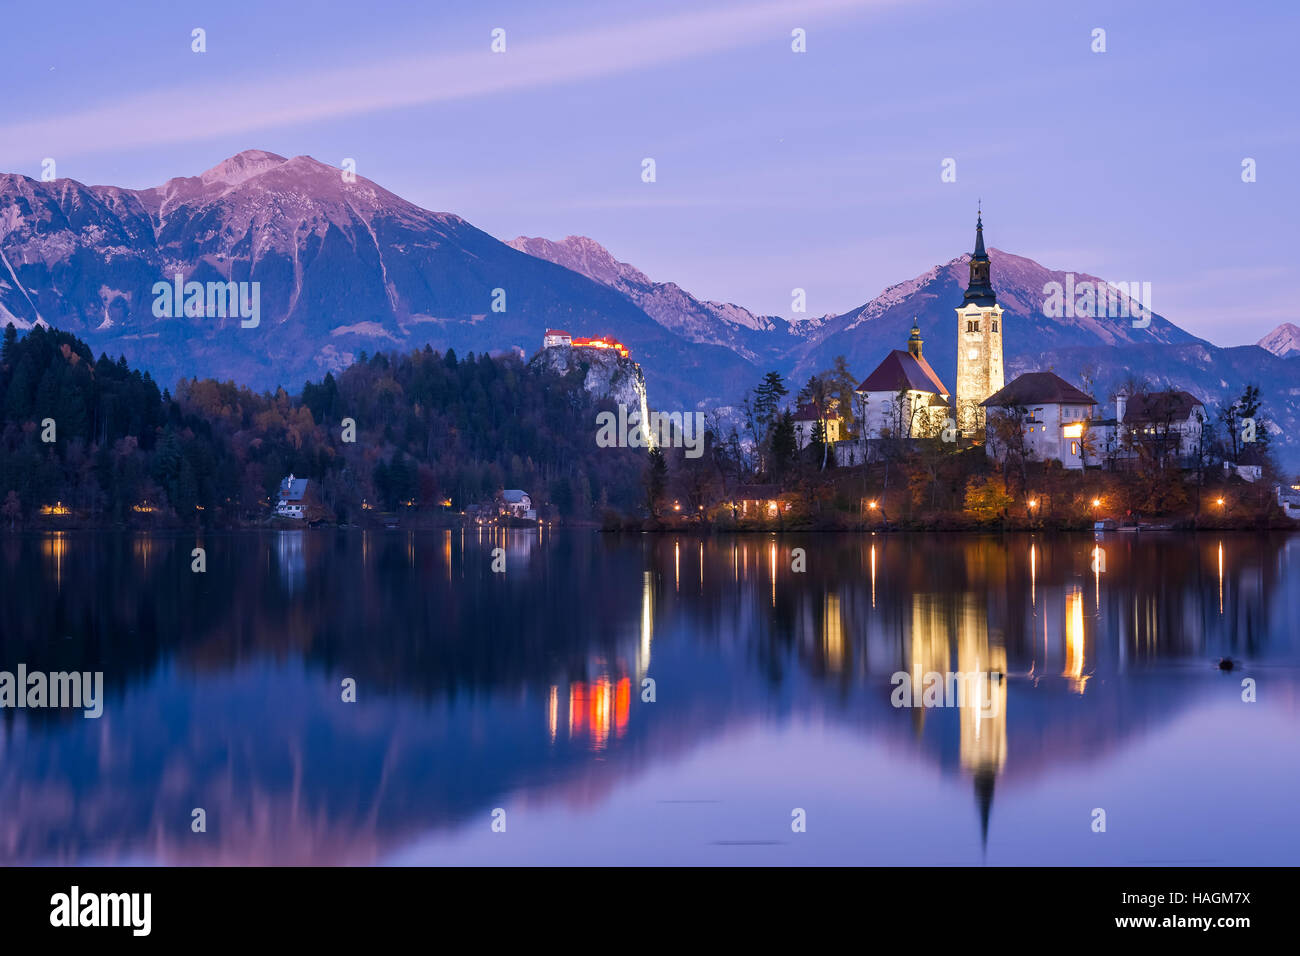 Chapel on a small island at twilight reflected in calm water, Bled, Slovenia Stock Photo